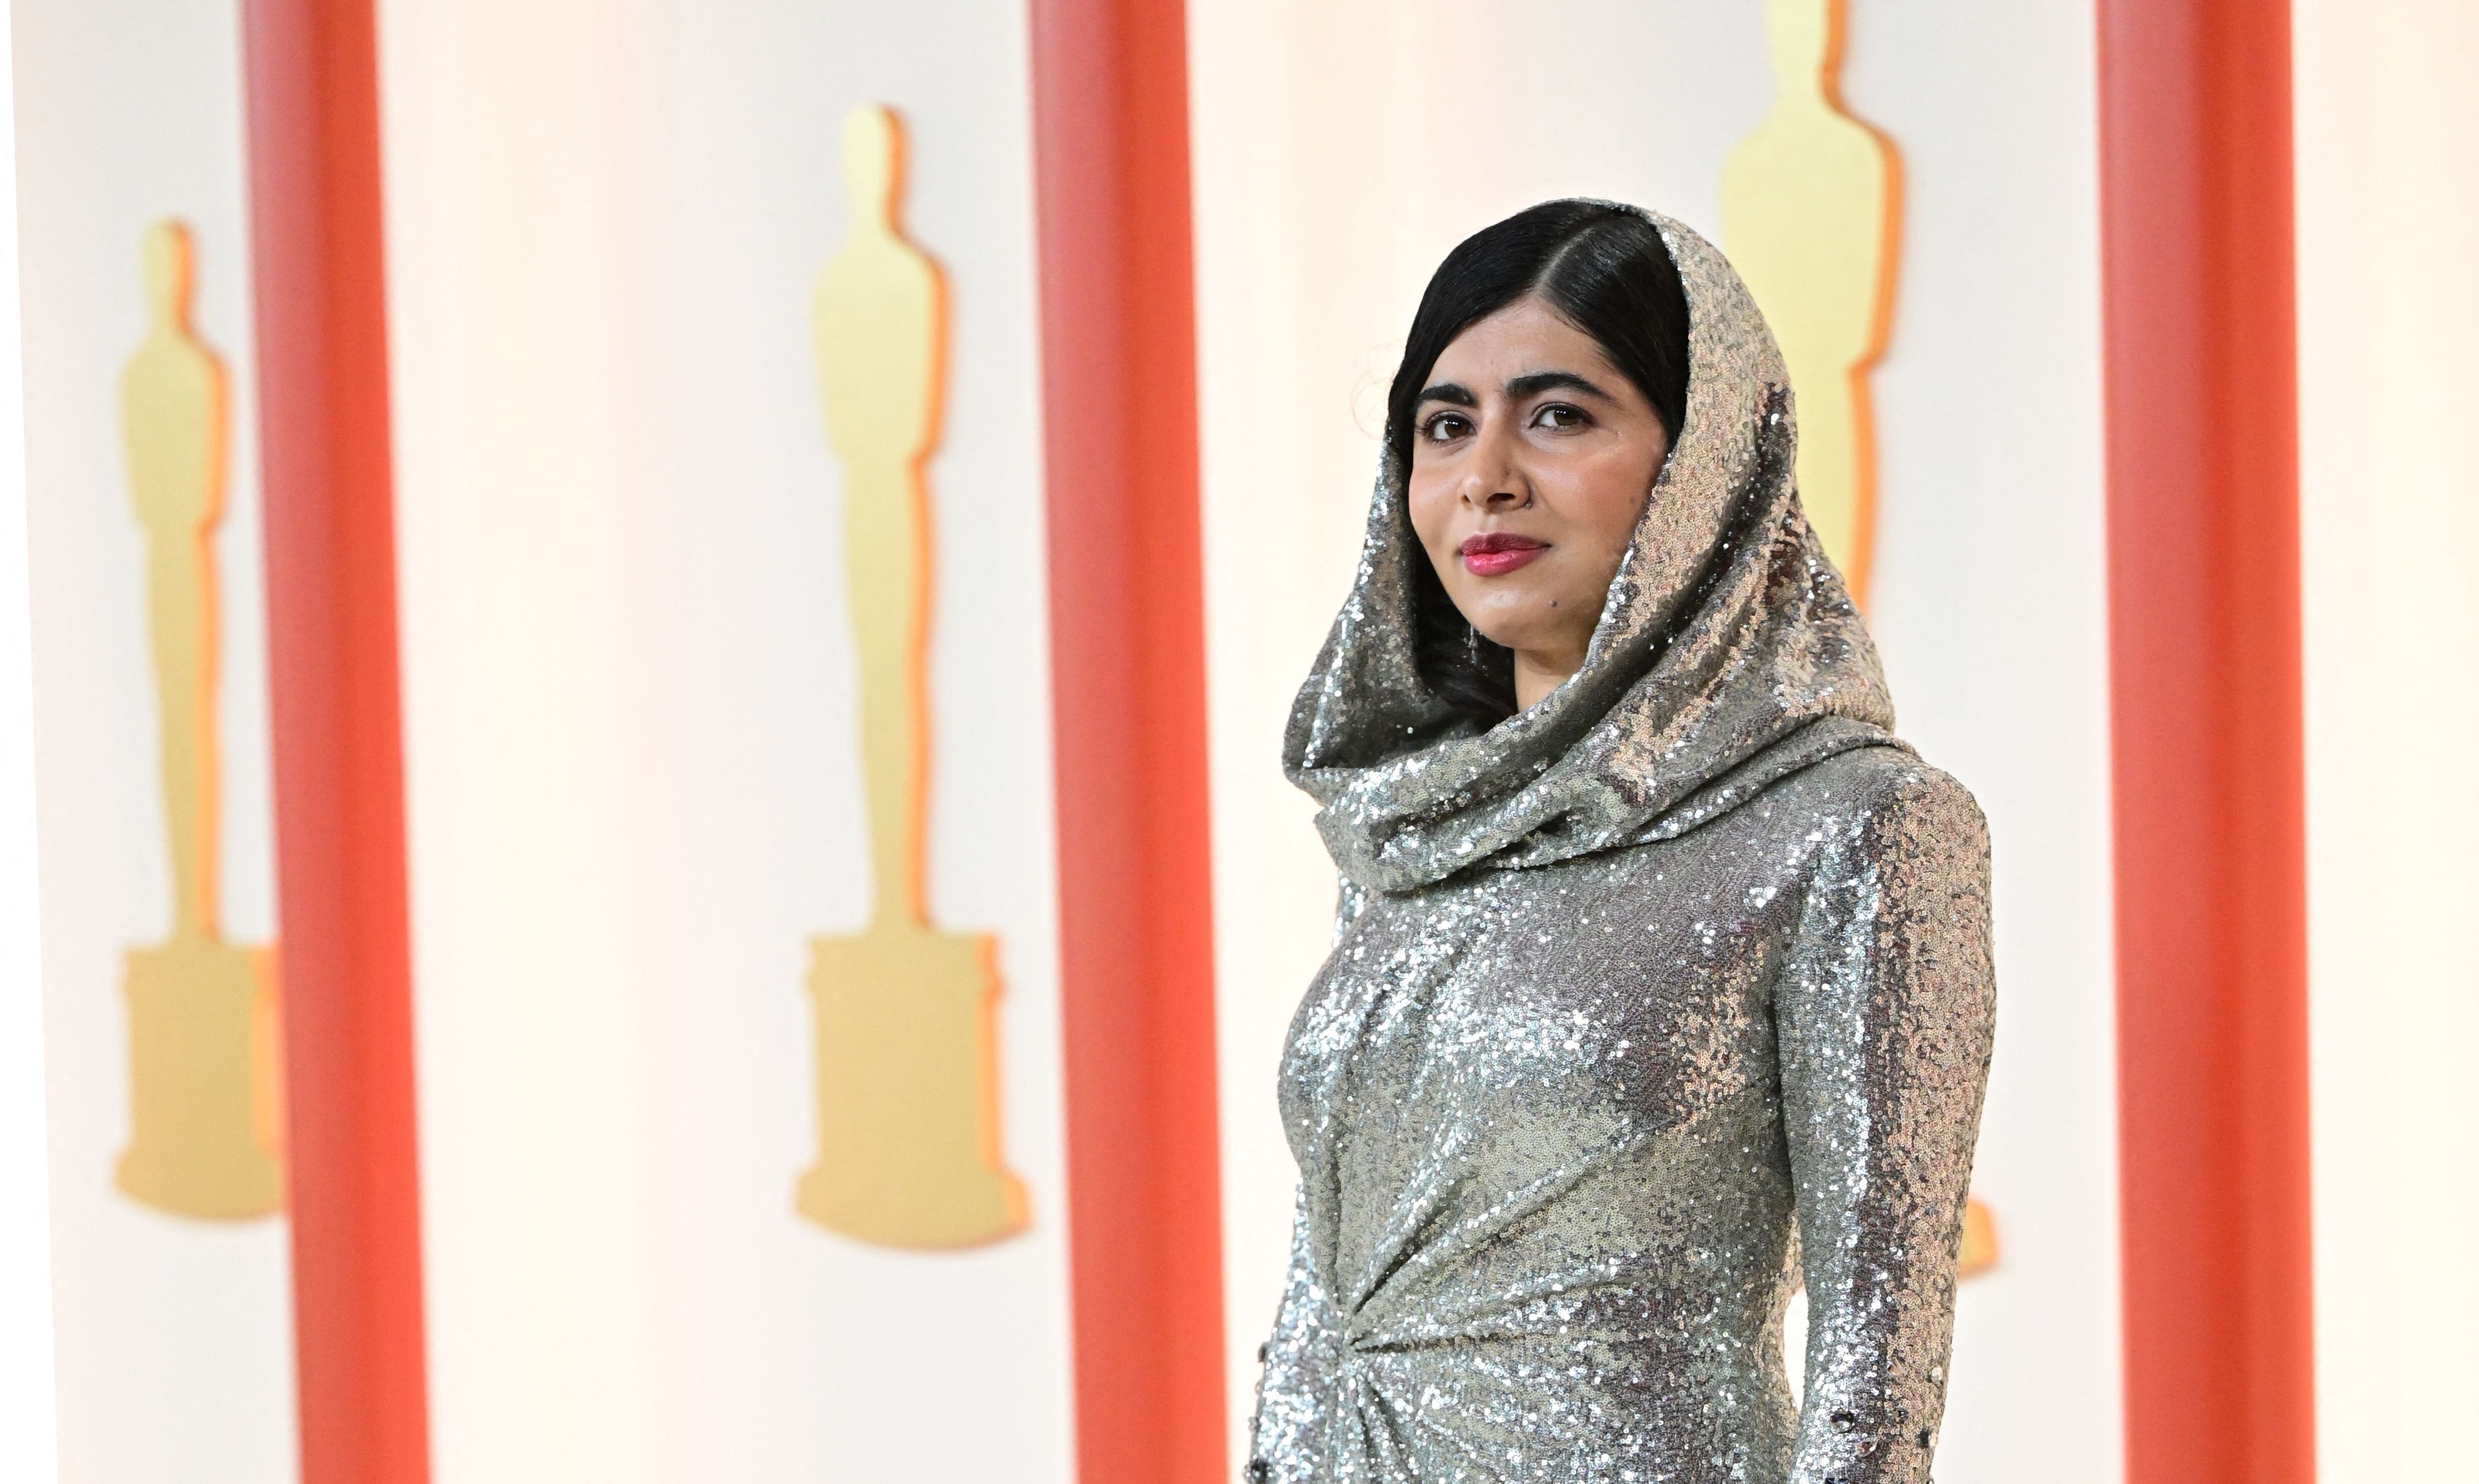 Pakistani activist Malala Yousafzai attends the 95th Annual Academy Awards at the Dolby Theatre in Hollywood, California on March 12, 2023. (Photo by Frederic J. Brown / AFP)